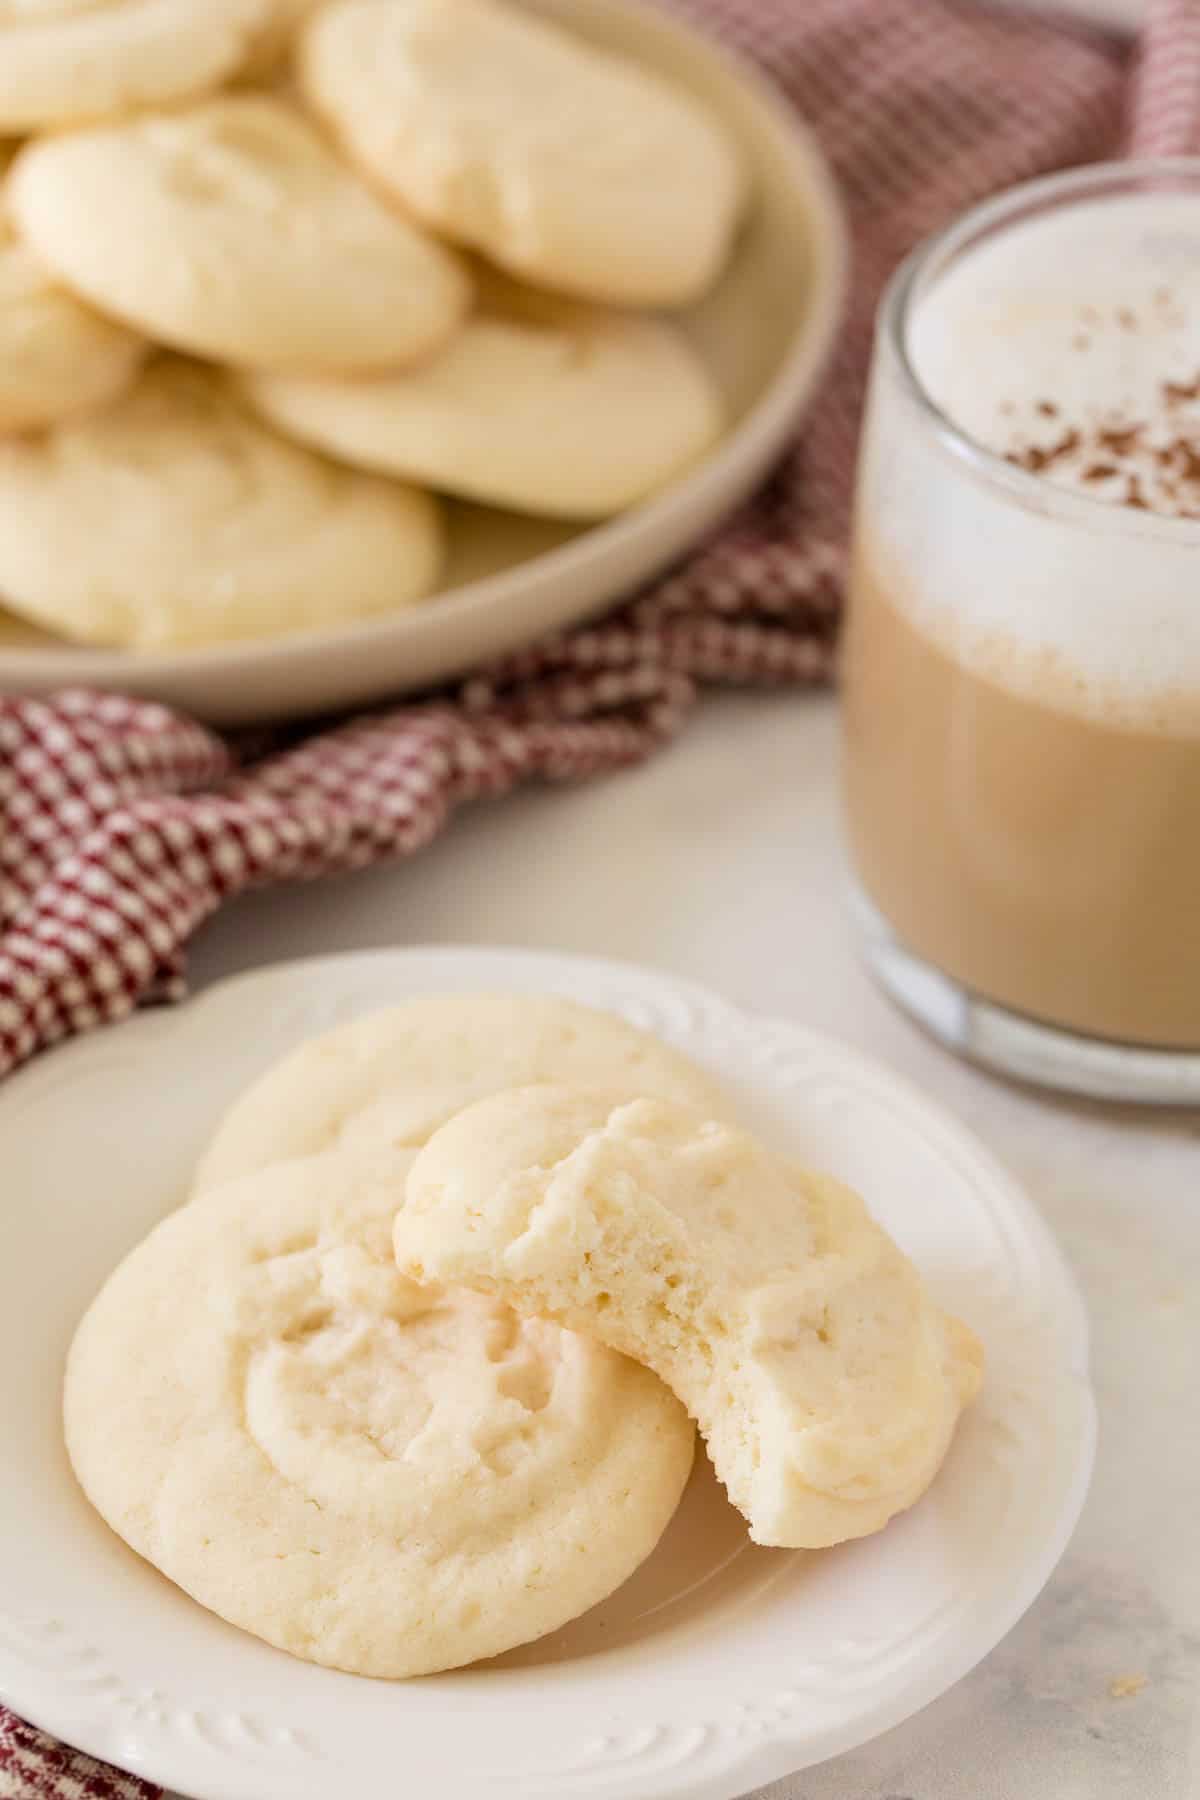 Whipped shortbread cookies on a plate with a bite out of one cookie